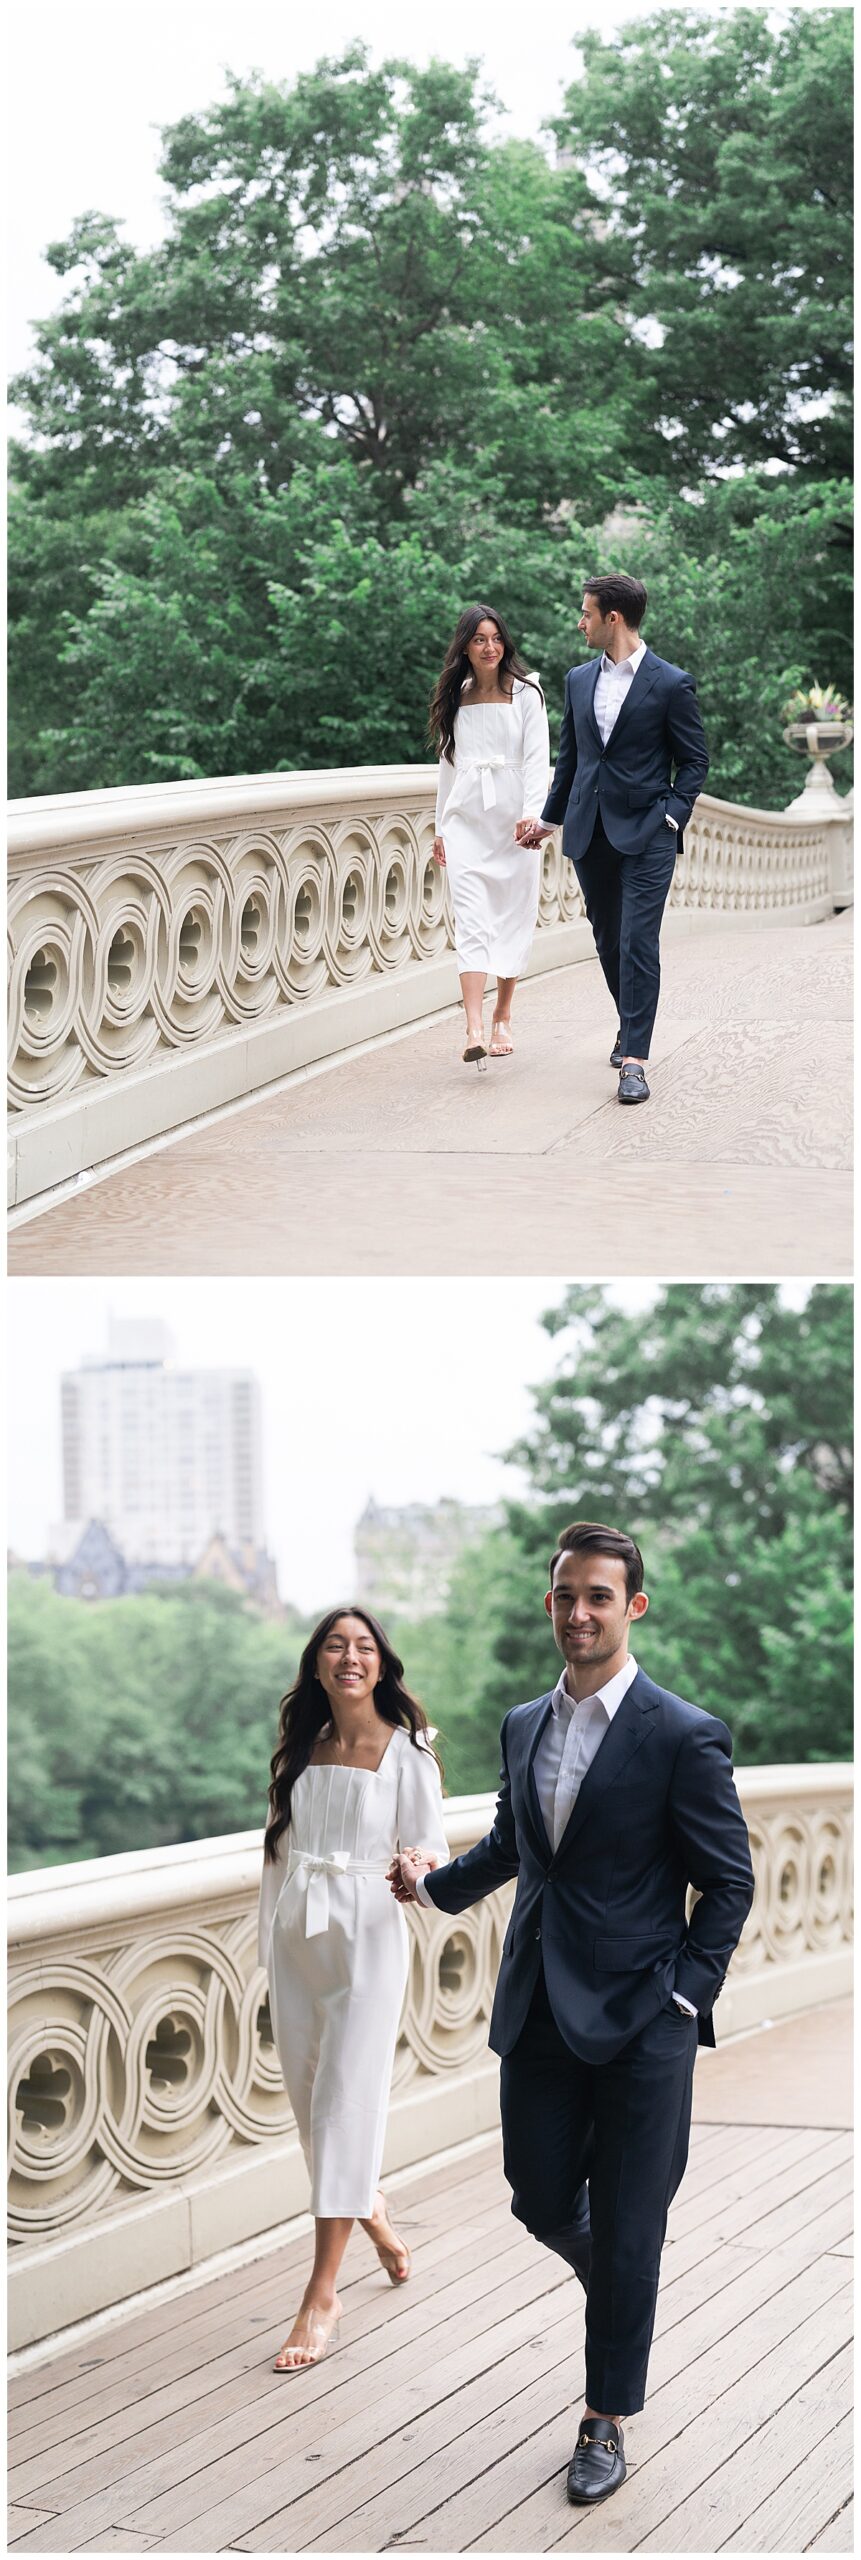 Couple laugh and smile together as they walk for Houston’s Best Wedding Photographers